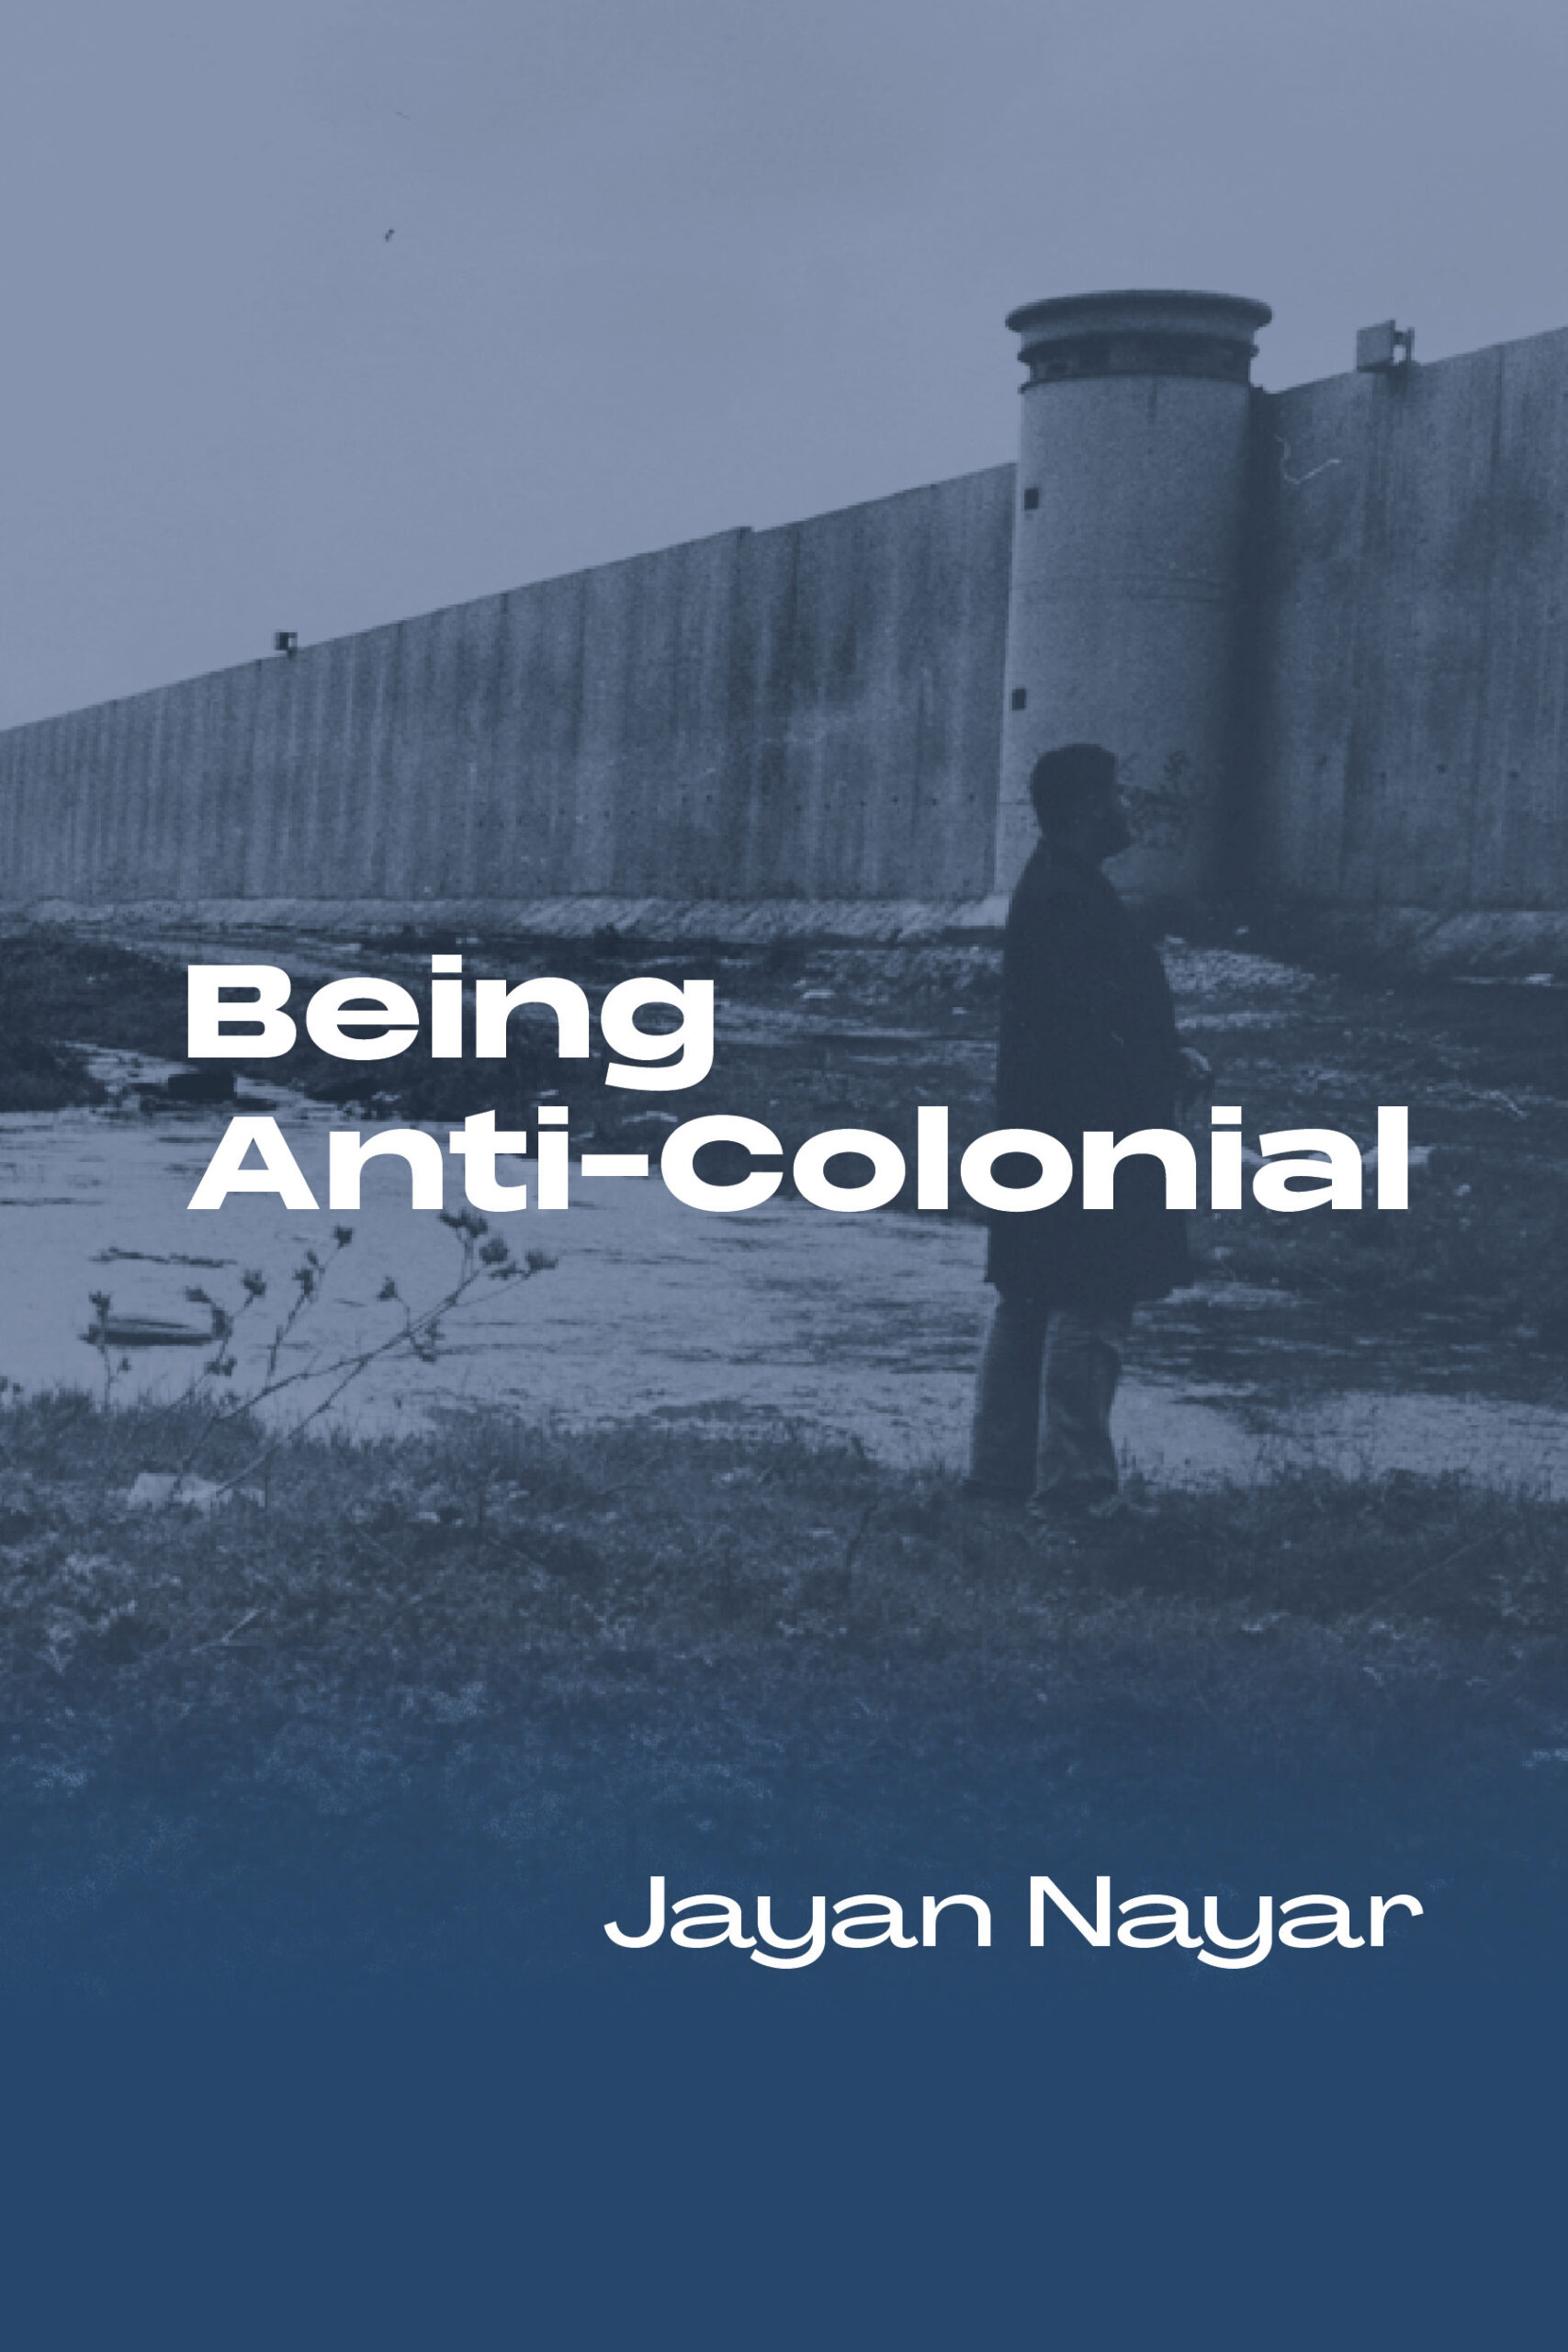 Being Anti-Colonial